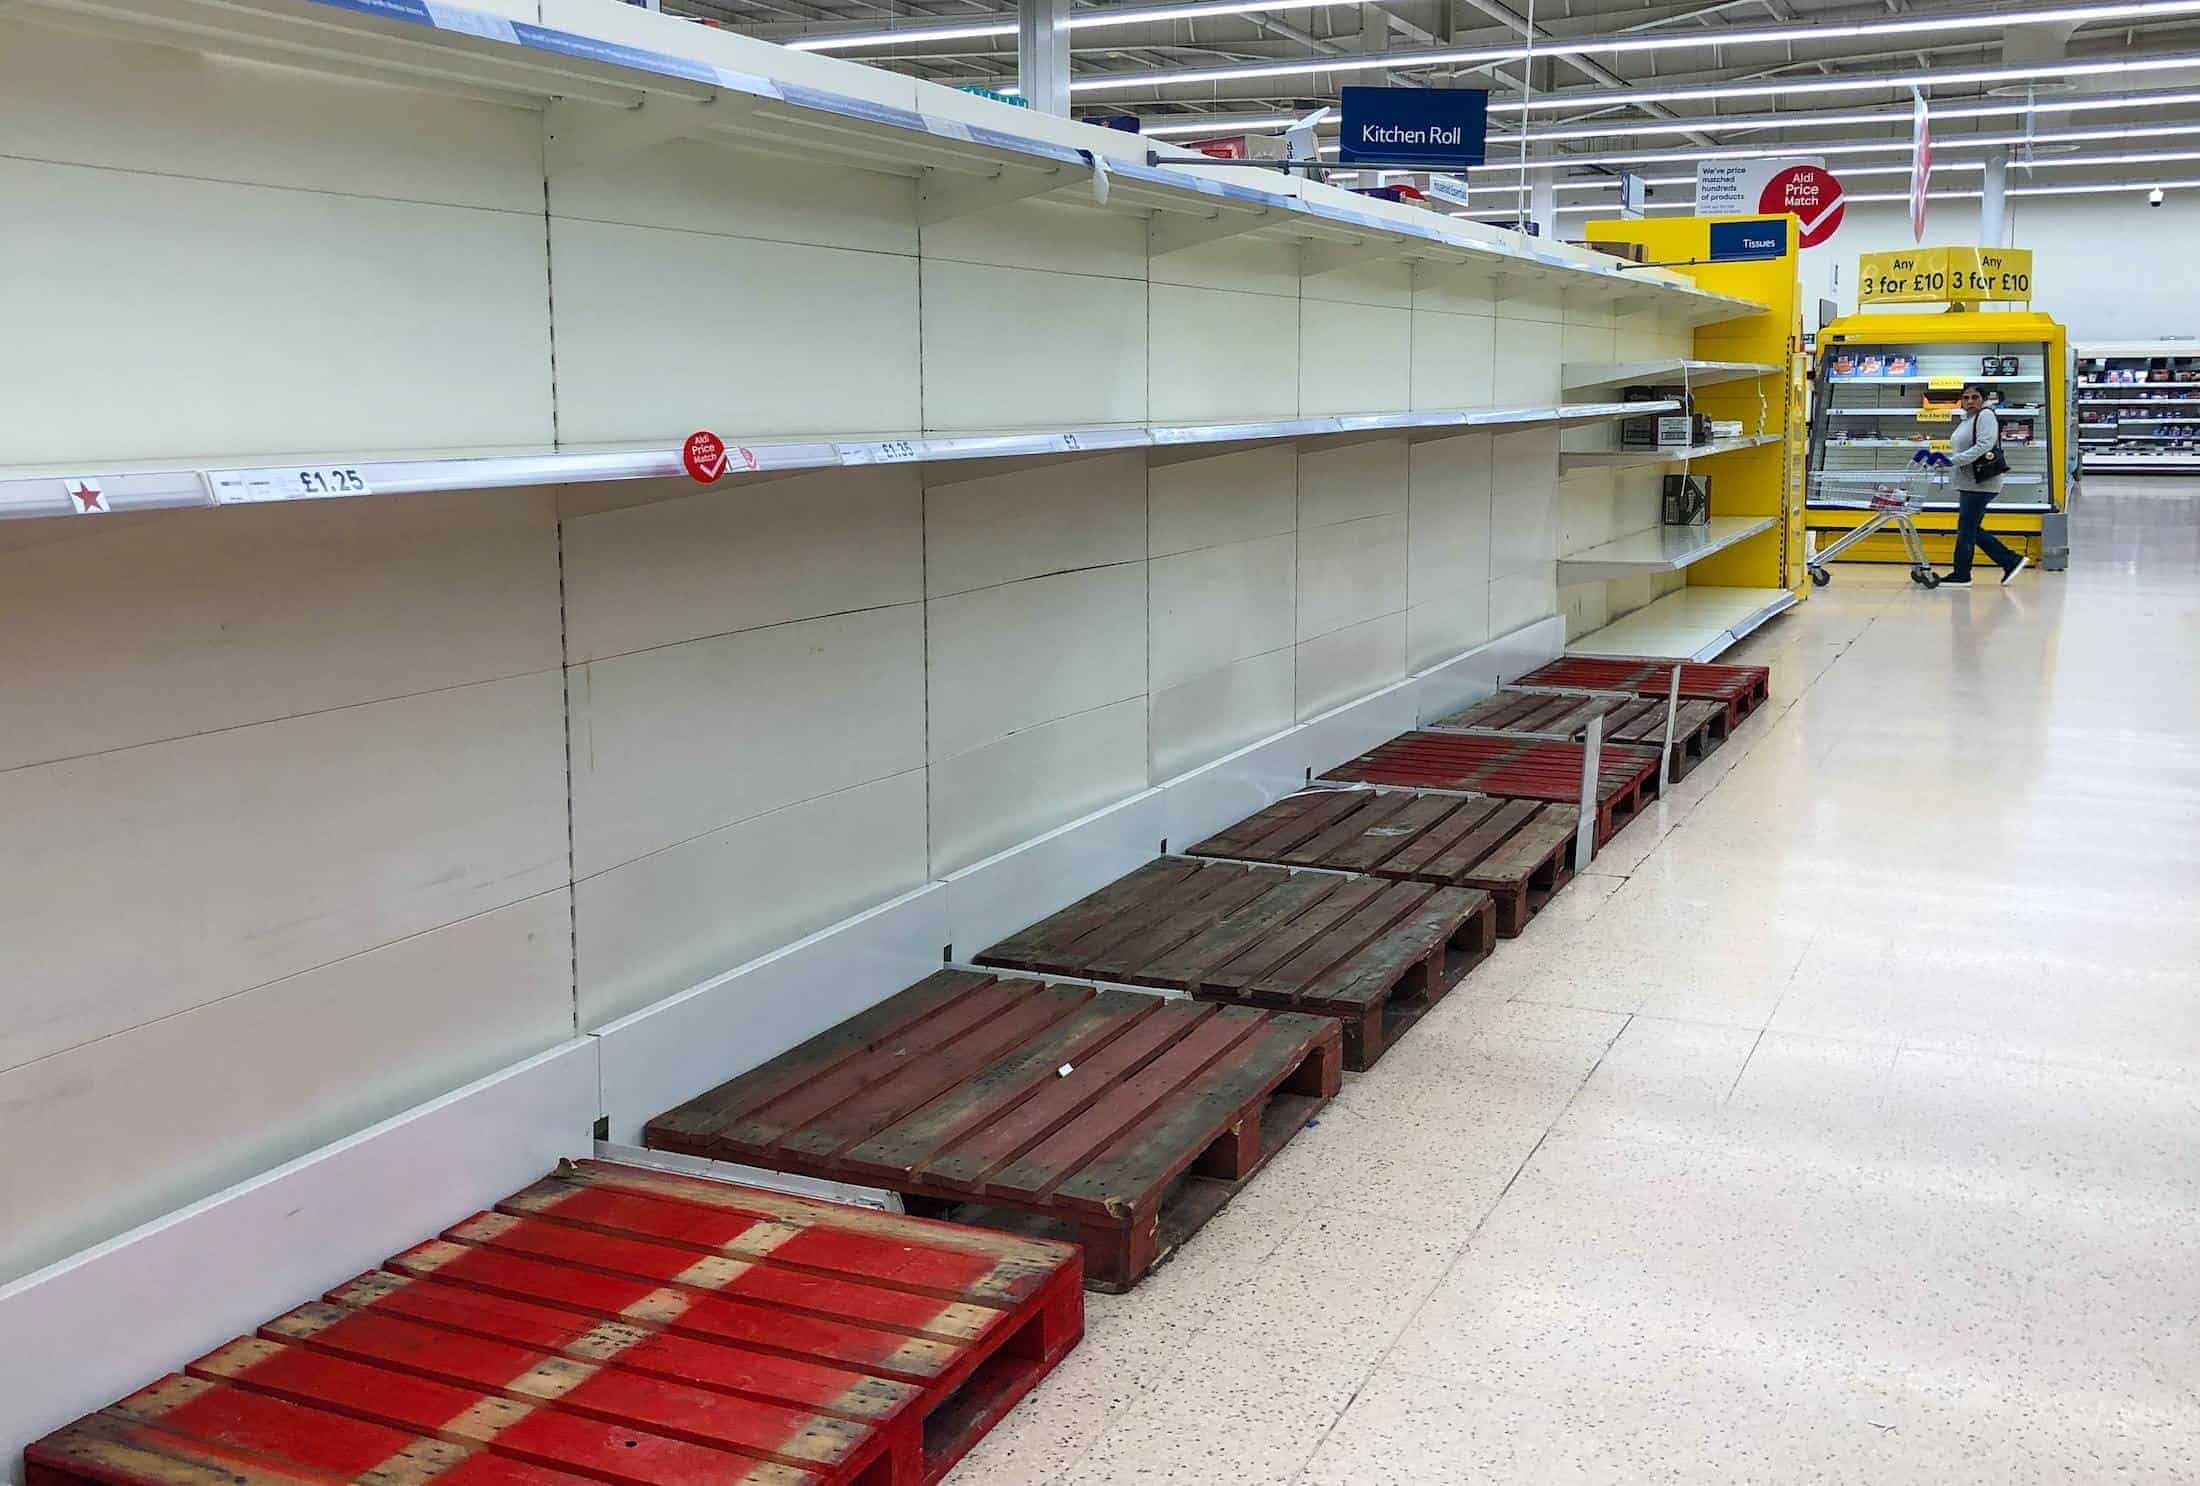 Covid alert level raised to 4 with cases up 4,368 as panic-buying recommences in supermarkets